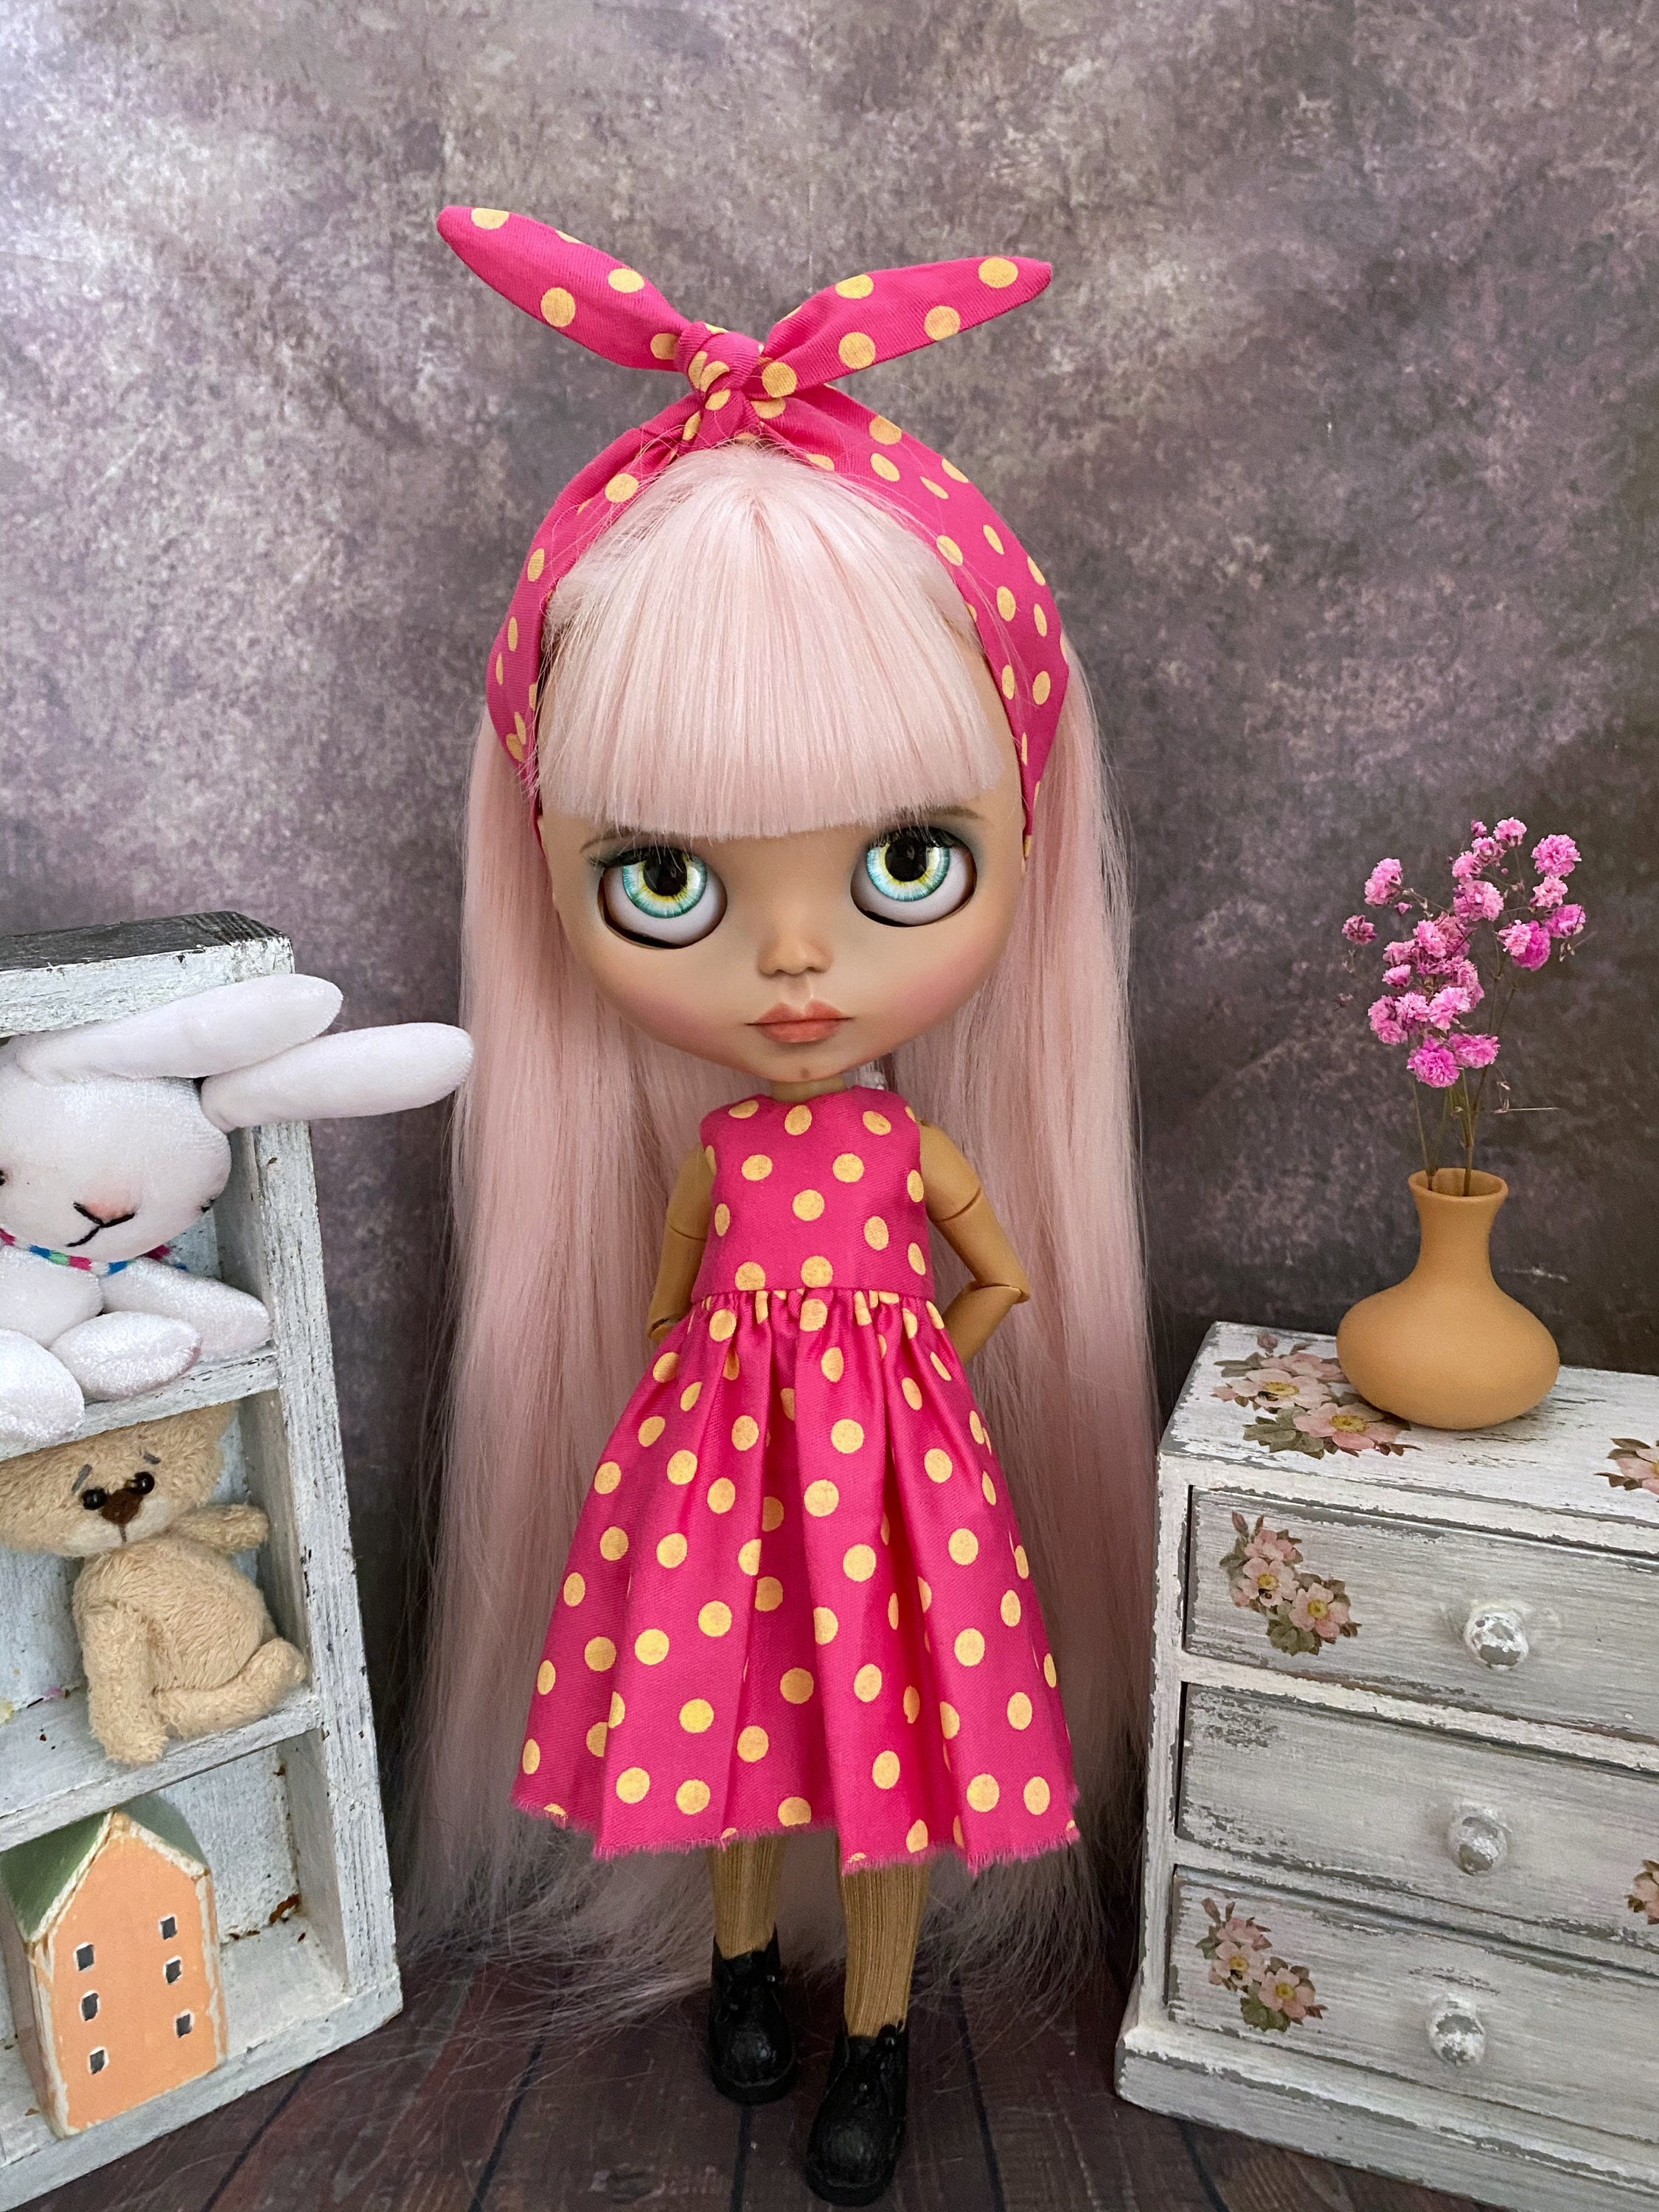 Deep pink with yellow polka dots outfit for Blythe doll: | Etsy